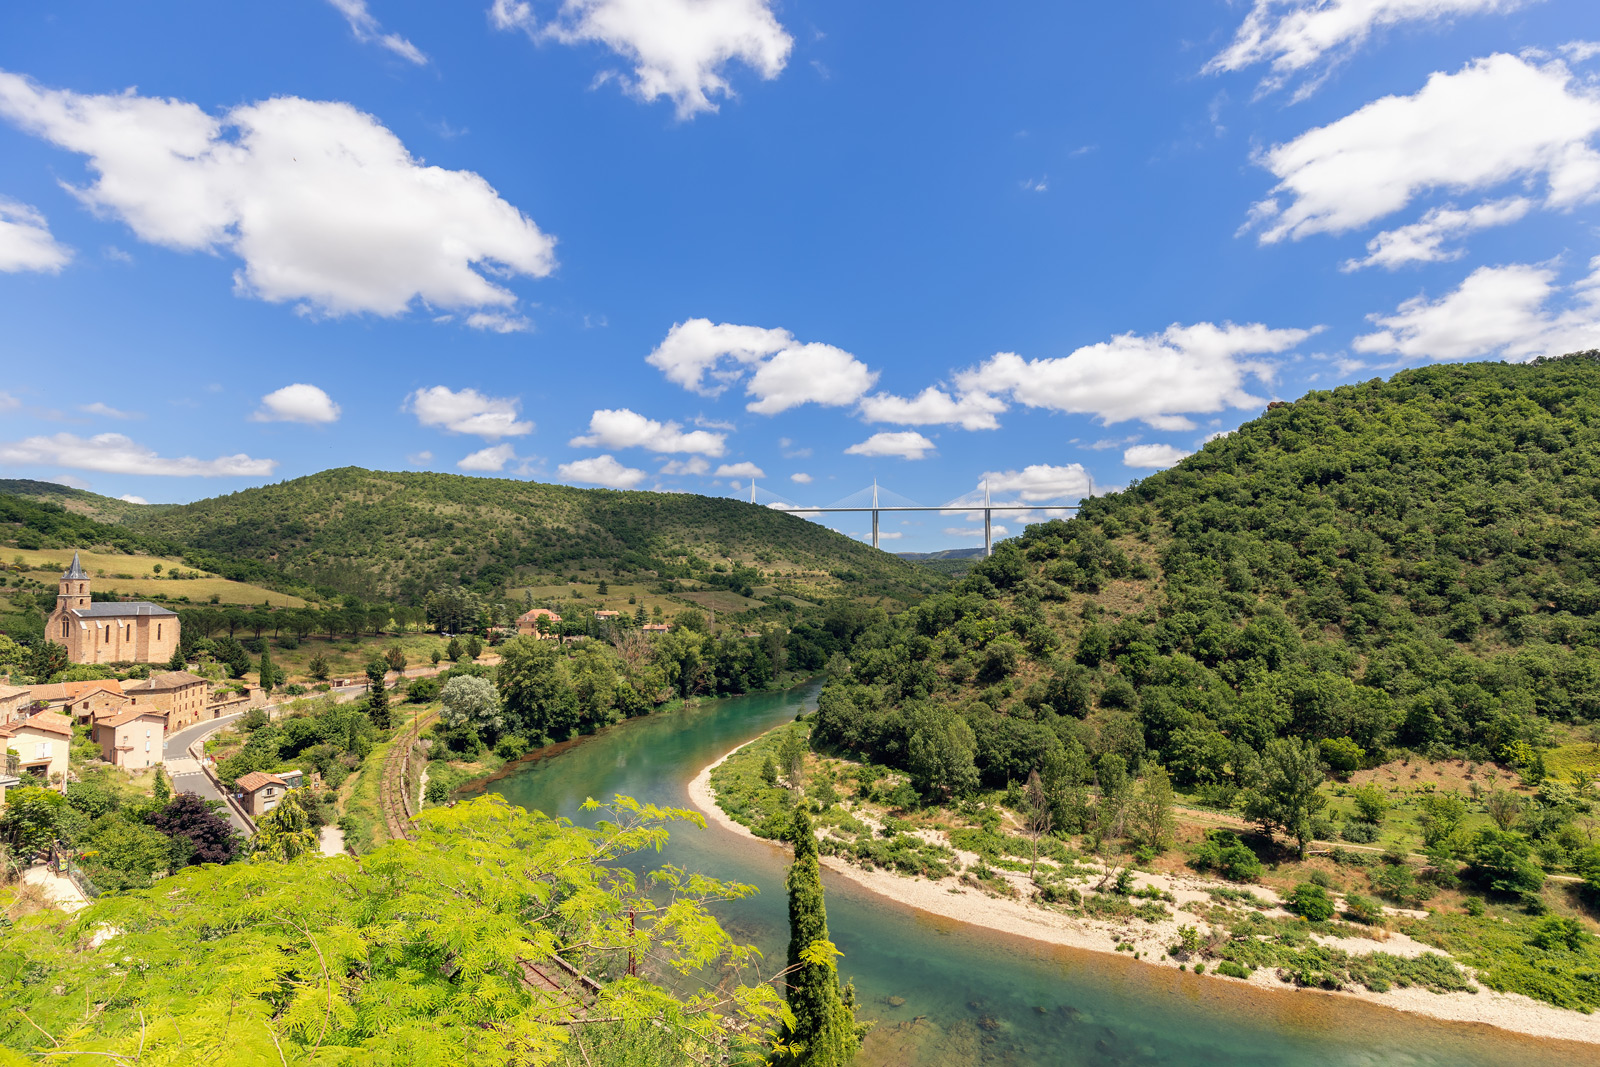 The most beautiful photo spots in Aveyron